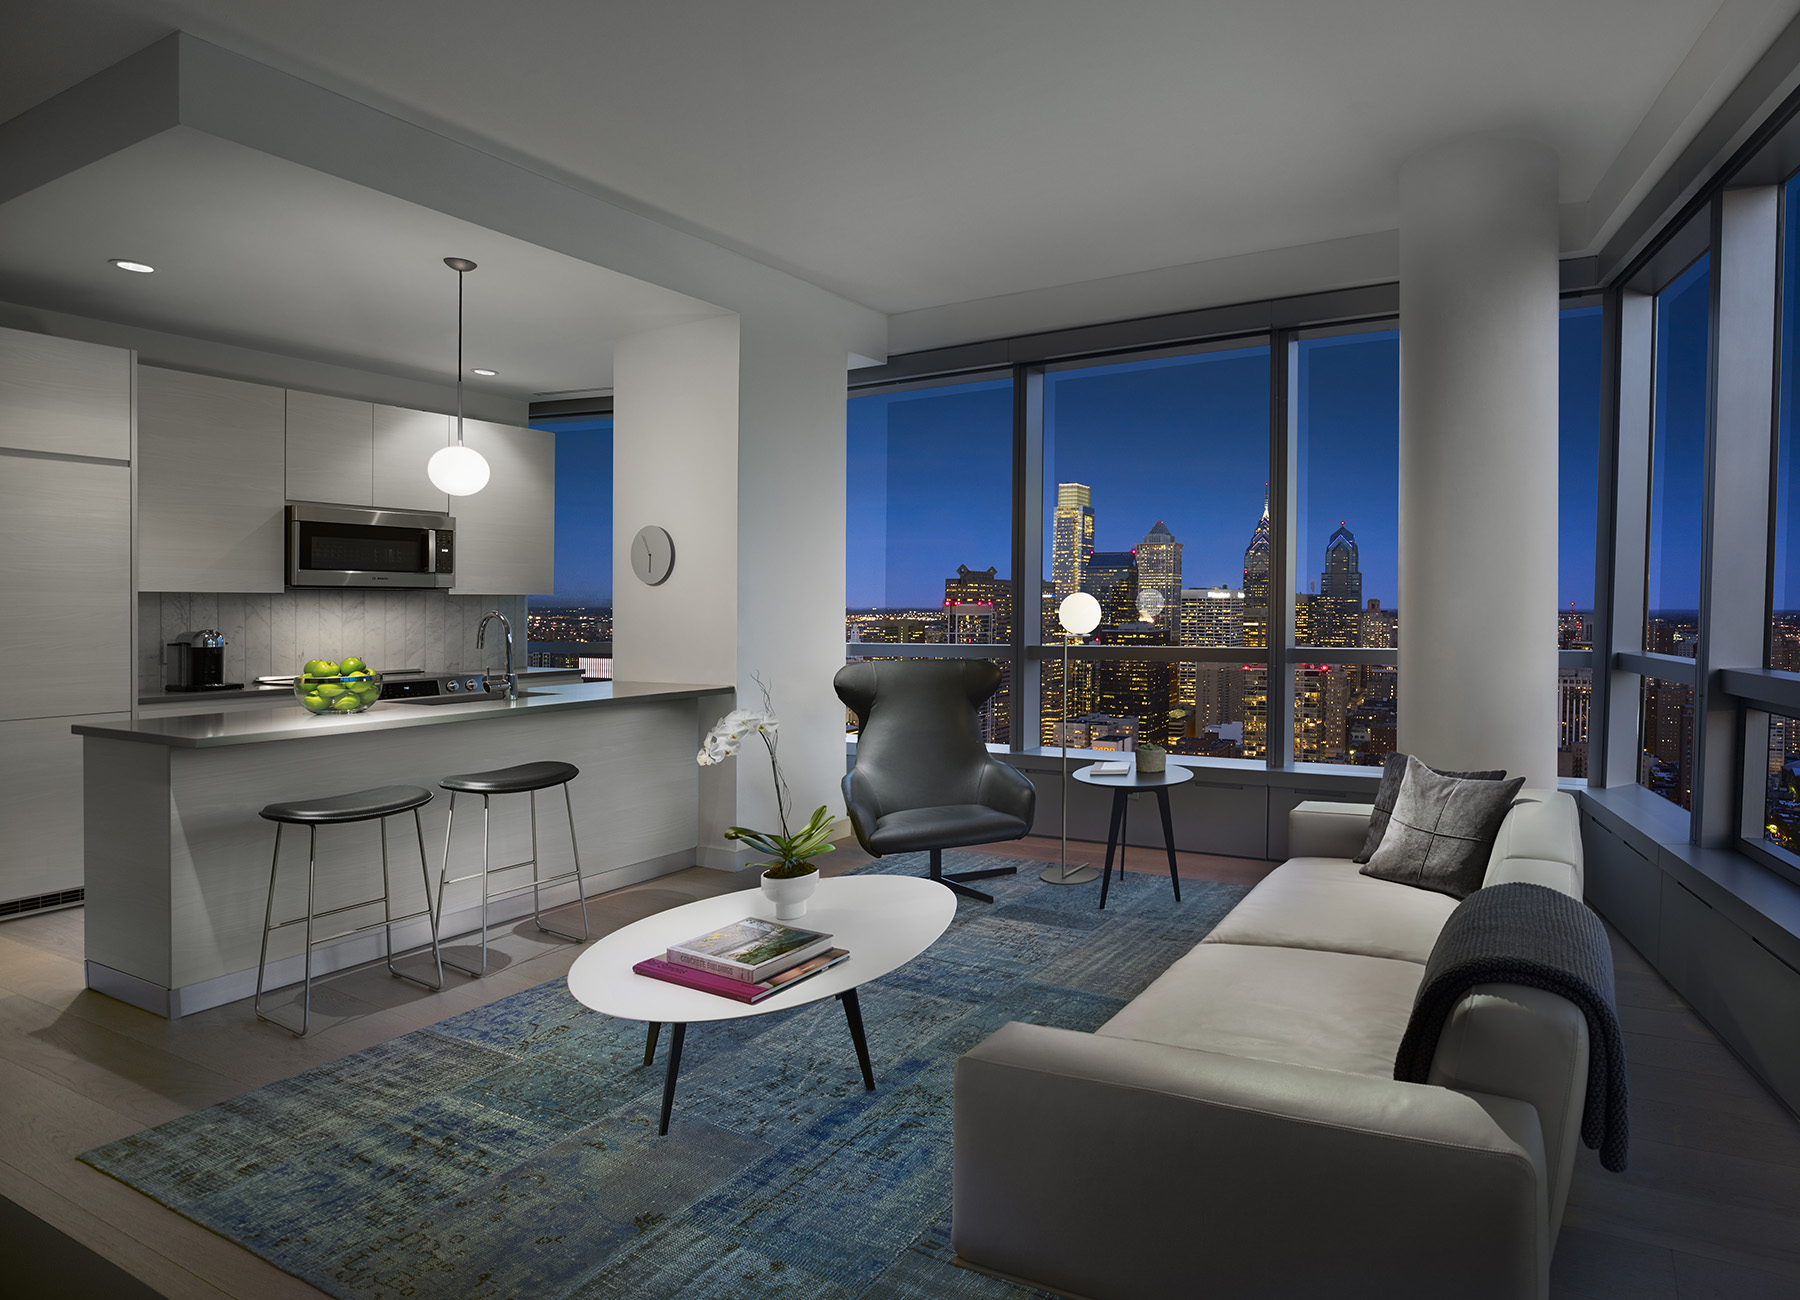 AKA University City living room with open kitchen and full-length window view of Philadelphia skyline at night 